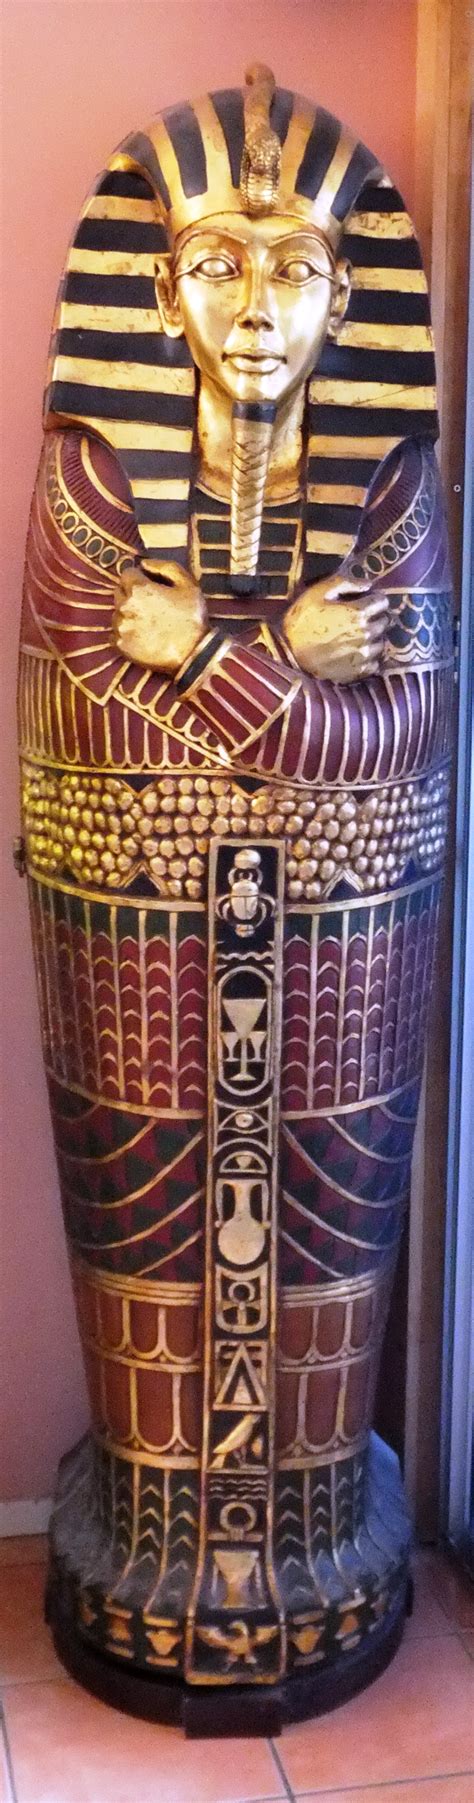 sarcophagus egypt pharaoh eclectic home art lessons